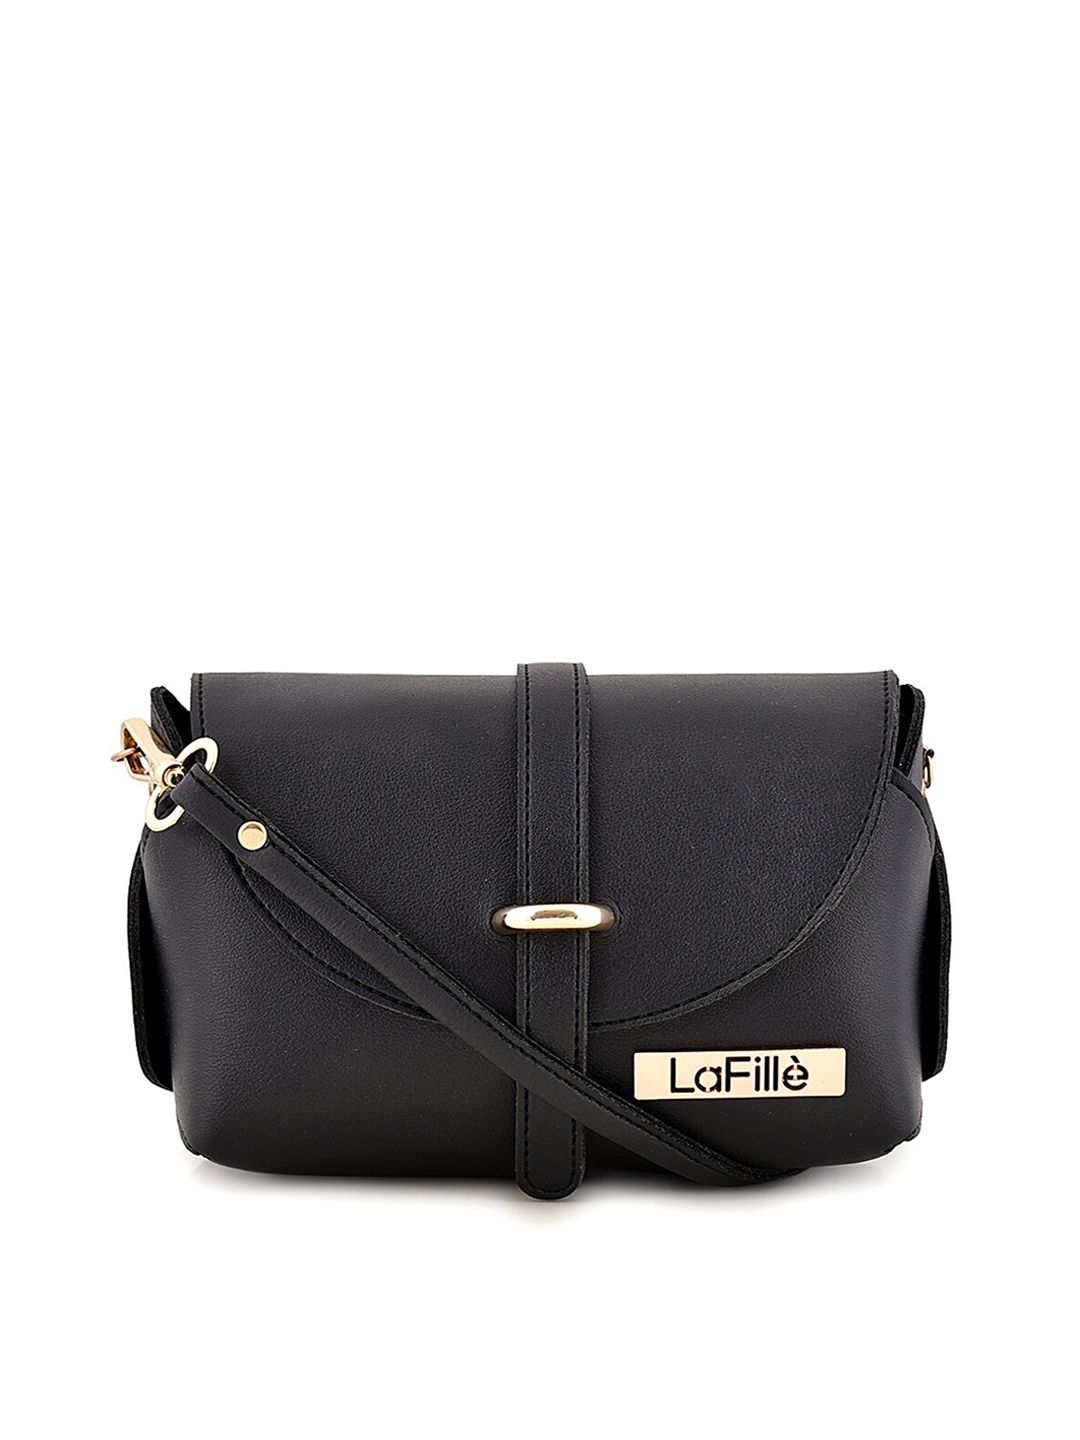 LaFille Black PU Structured Handheld Bag with Tasselled Price in India